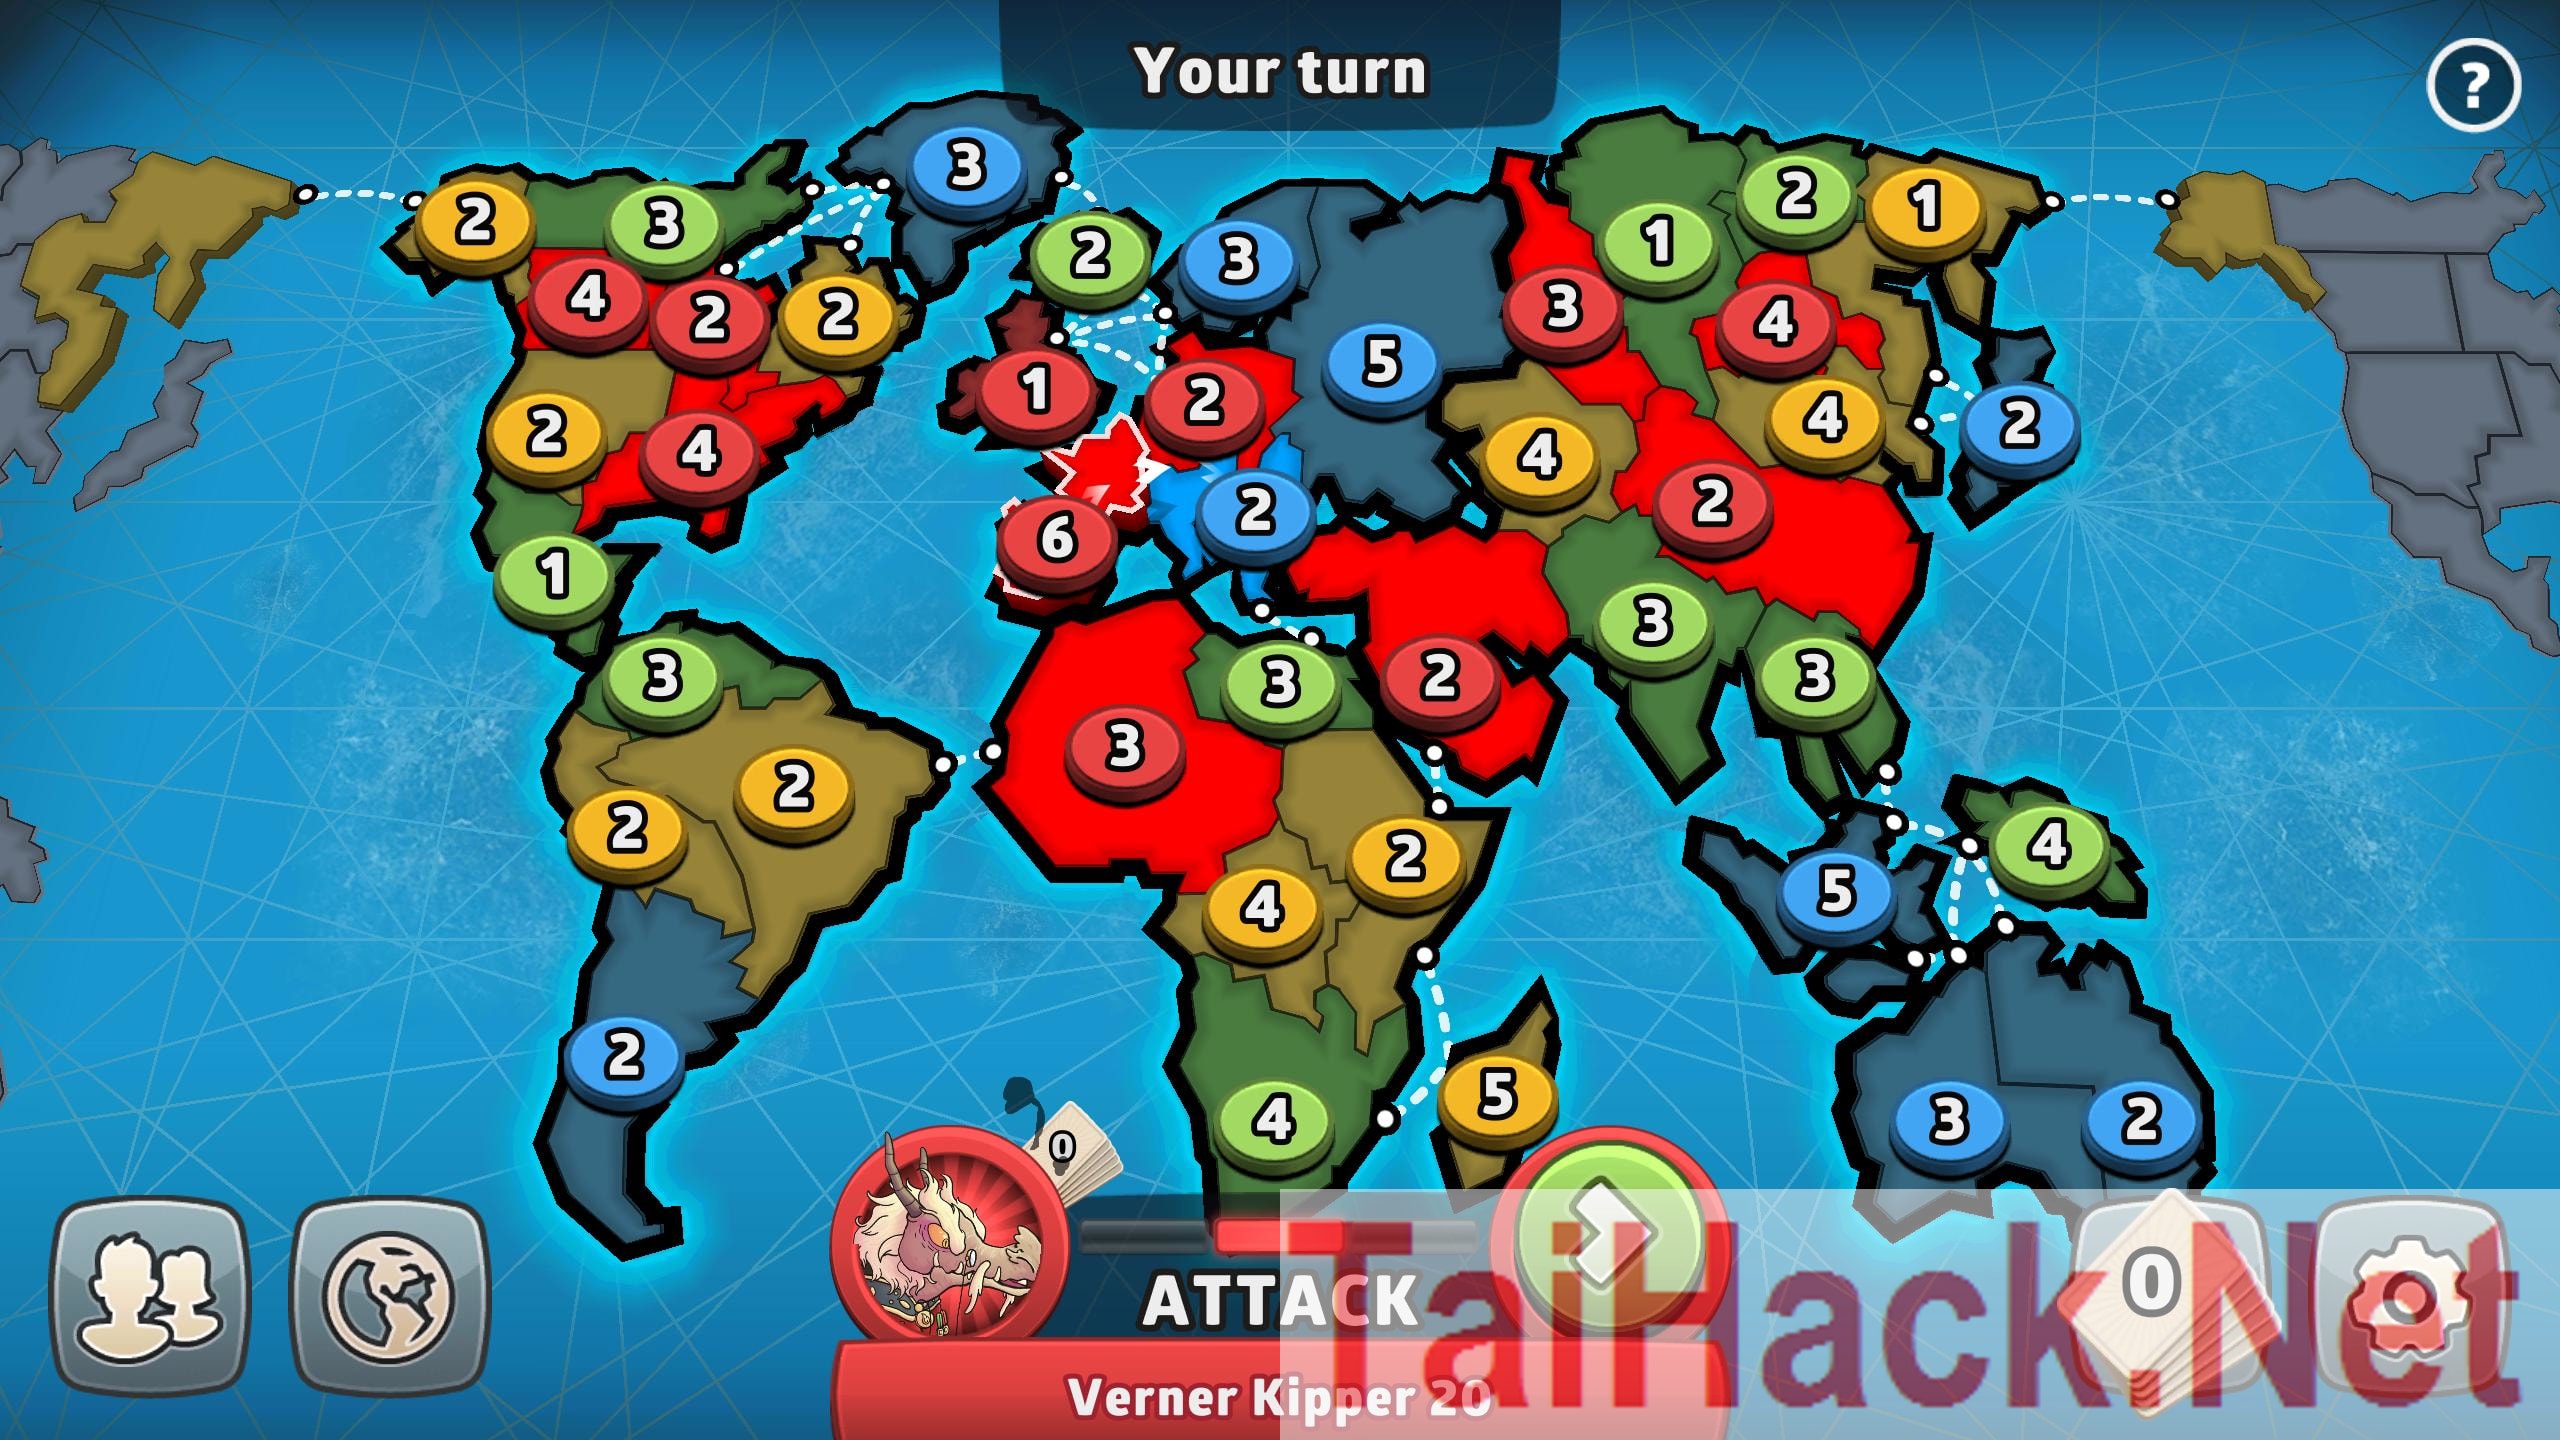 Download Hack RISK: Global Domination MOD Unlimited tokens. This is the best card game of 2019, With attractive game mode with this hack you can completely receive unlimited notifications, helping you to be the winner in this game. Update the latest hack games for free daily at TaiHack.Net.